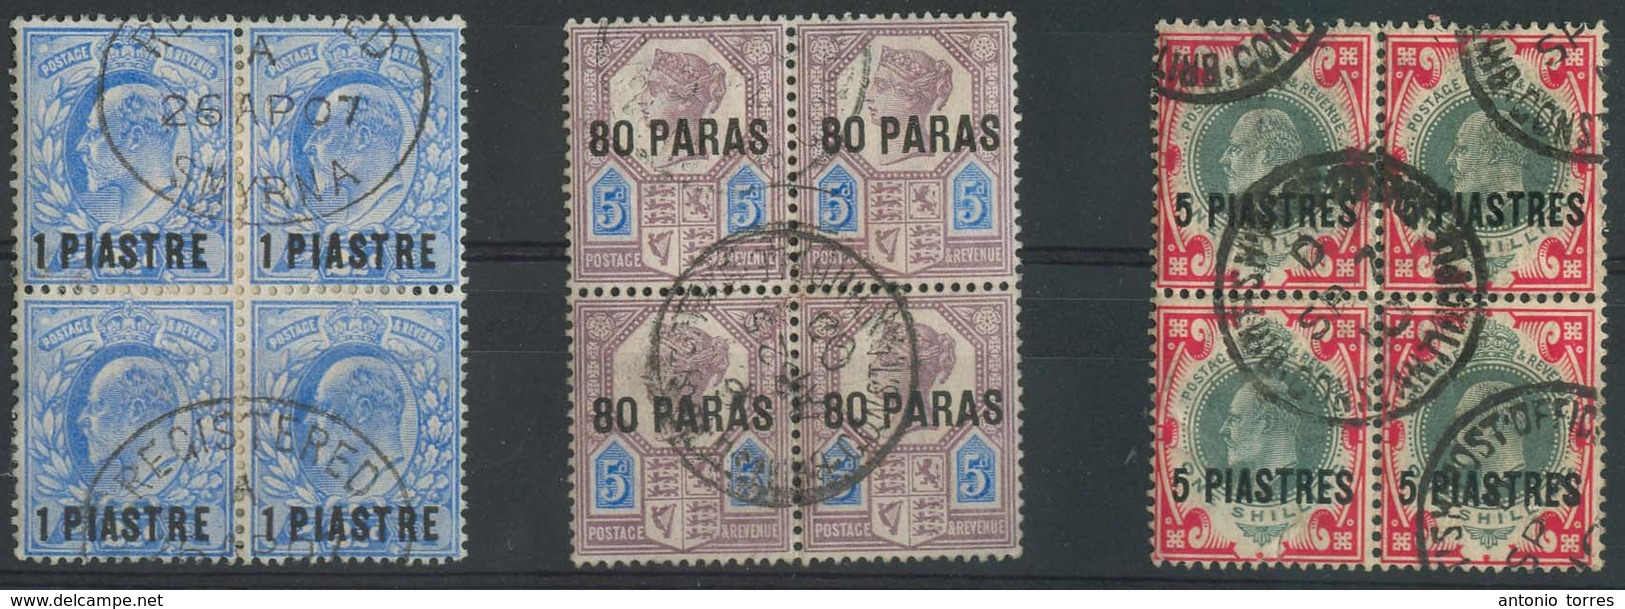 GrB - British Levant. 1905-7. 3 Diff Values Block Of 4 Used Incl 80p, 1 Piaster + 5 Piaster. Cancelled At Smyrna And Con - ...-1840 Vorläufer